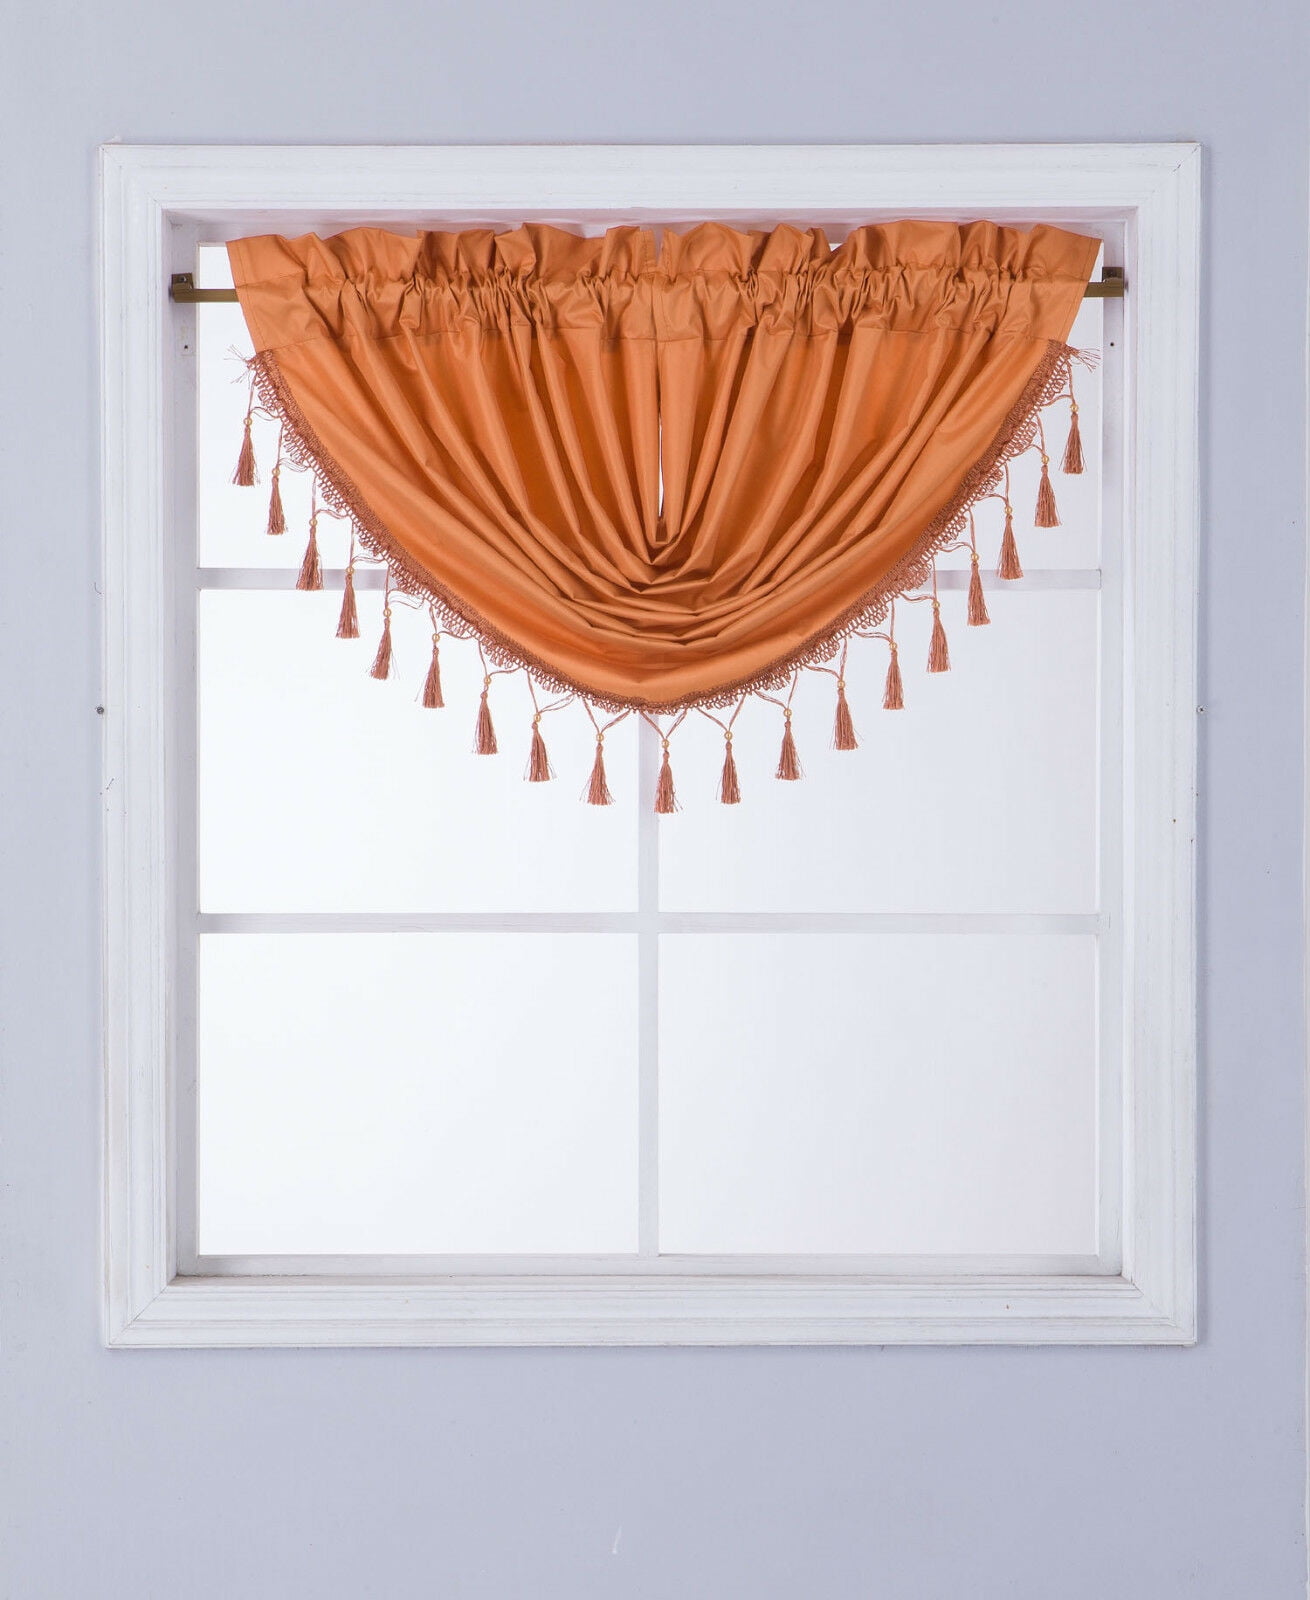 DRESS YOUR WINDOW WITH THIS ELEGANT 1 PC RS8 WATERFALL VALANCE ORANGE ...